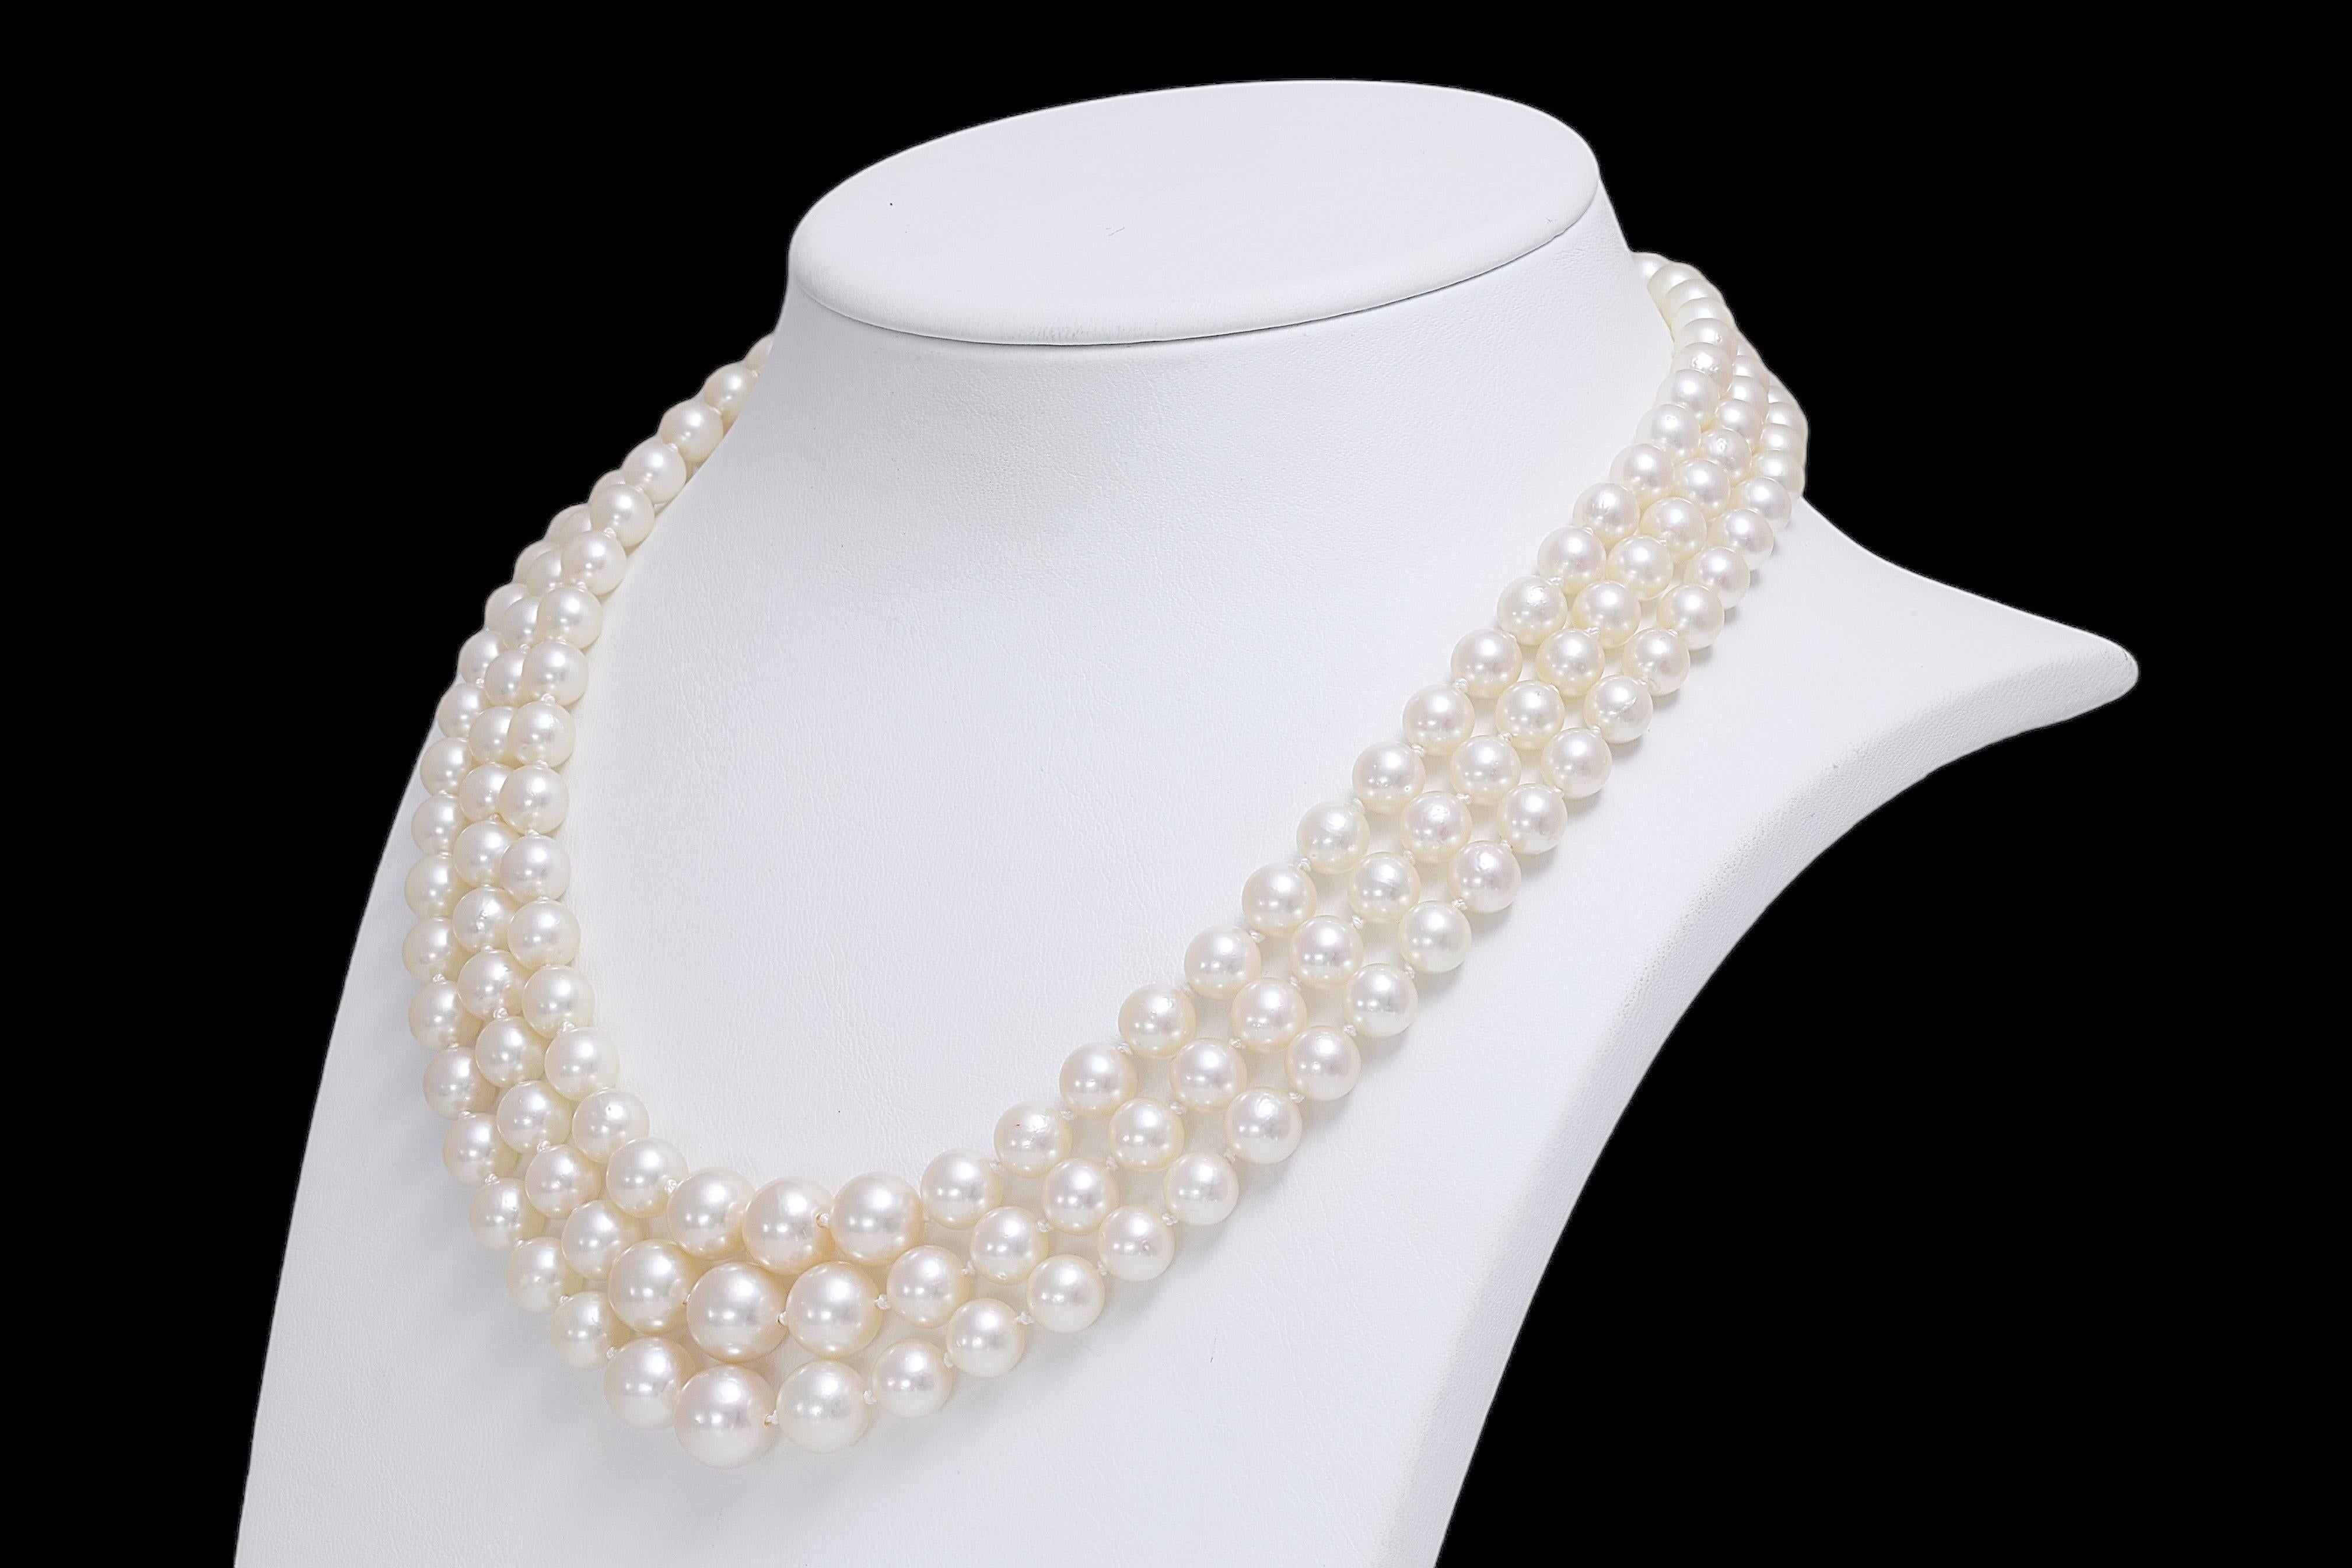 18 kt. White Gold Akoya Degradé Pearls and Diamonds 3 Strand Necklace For Sale 4